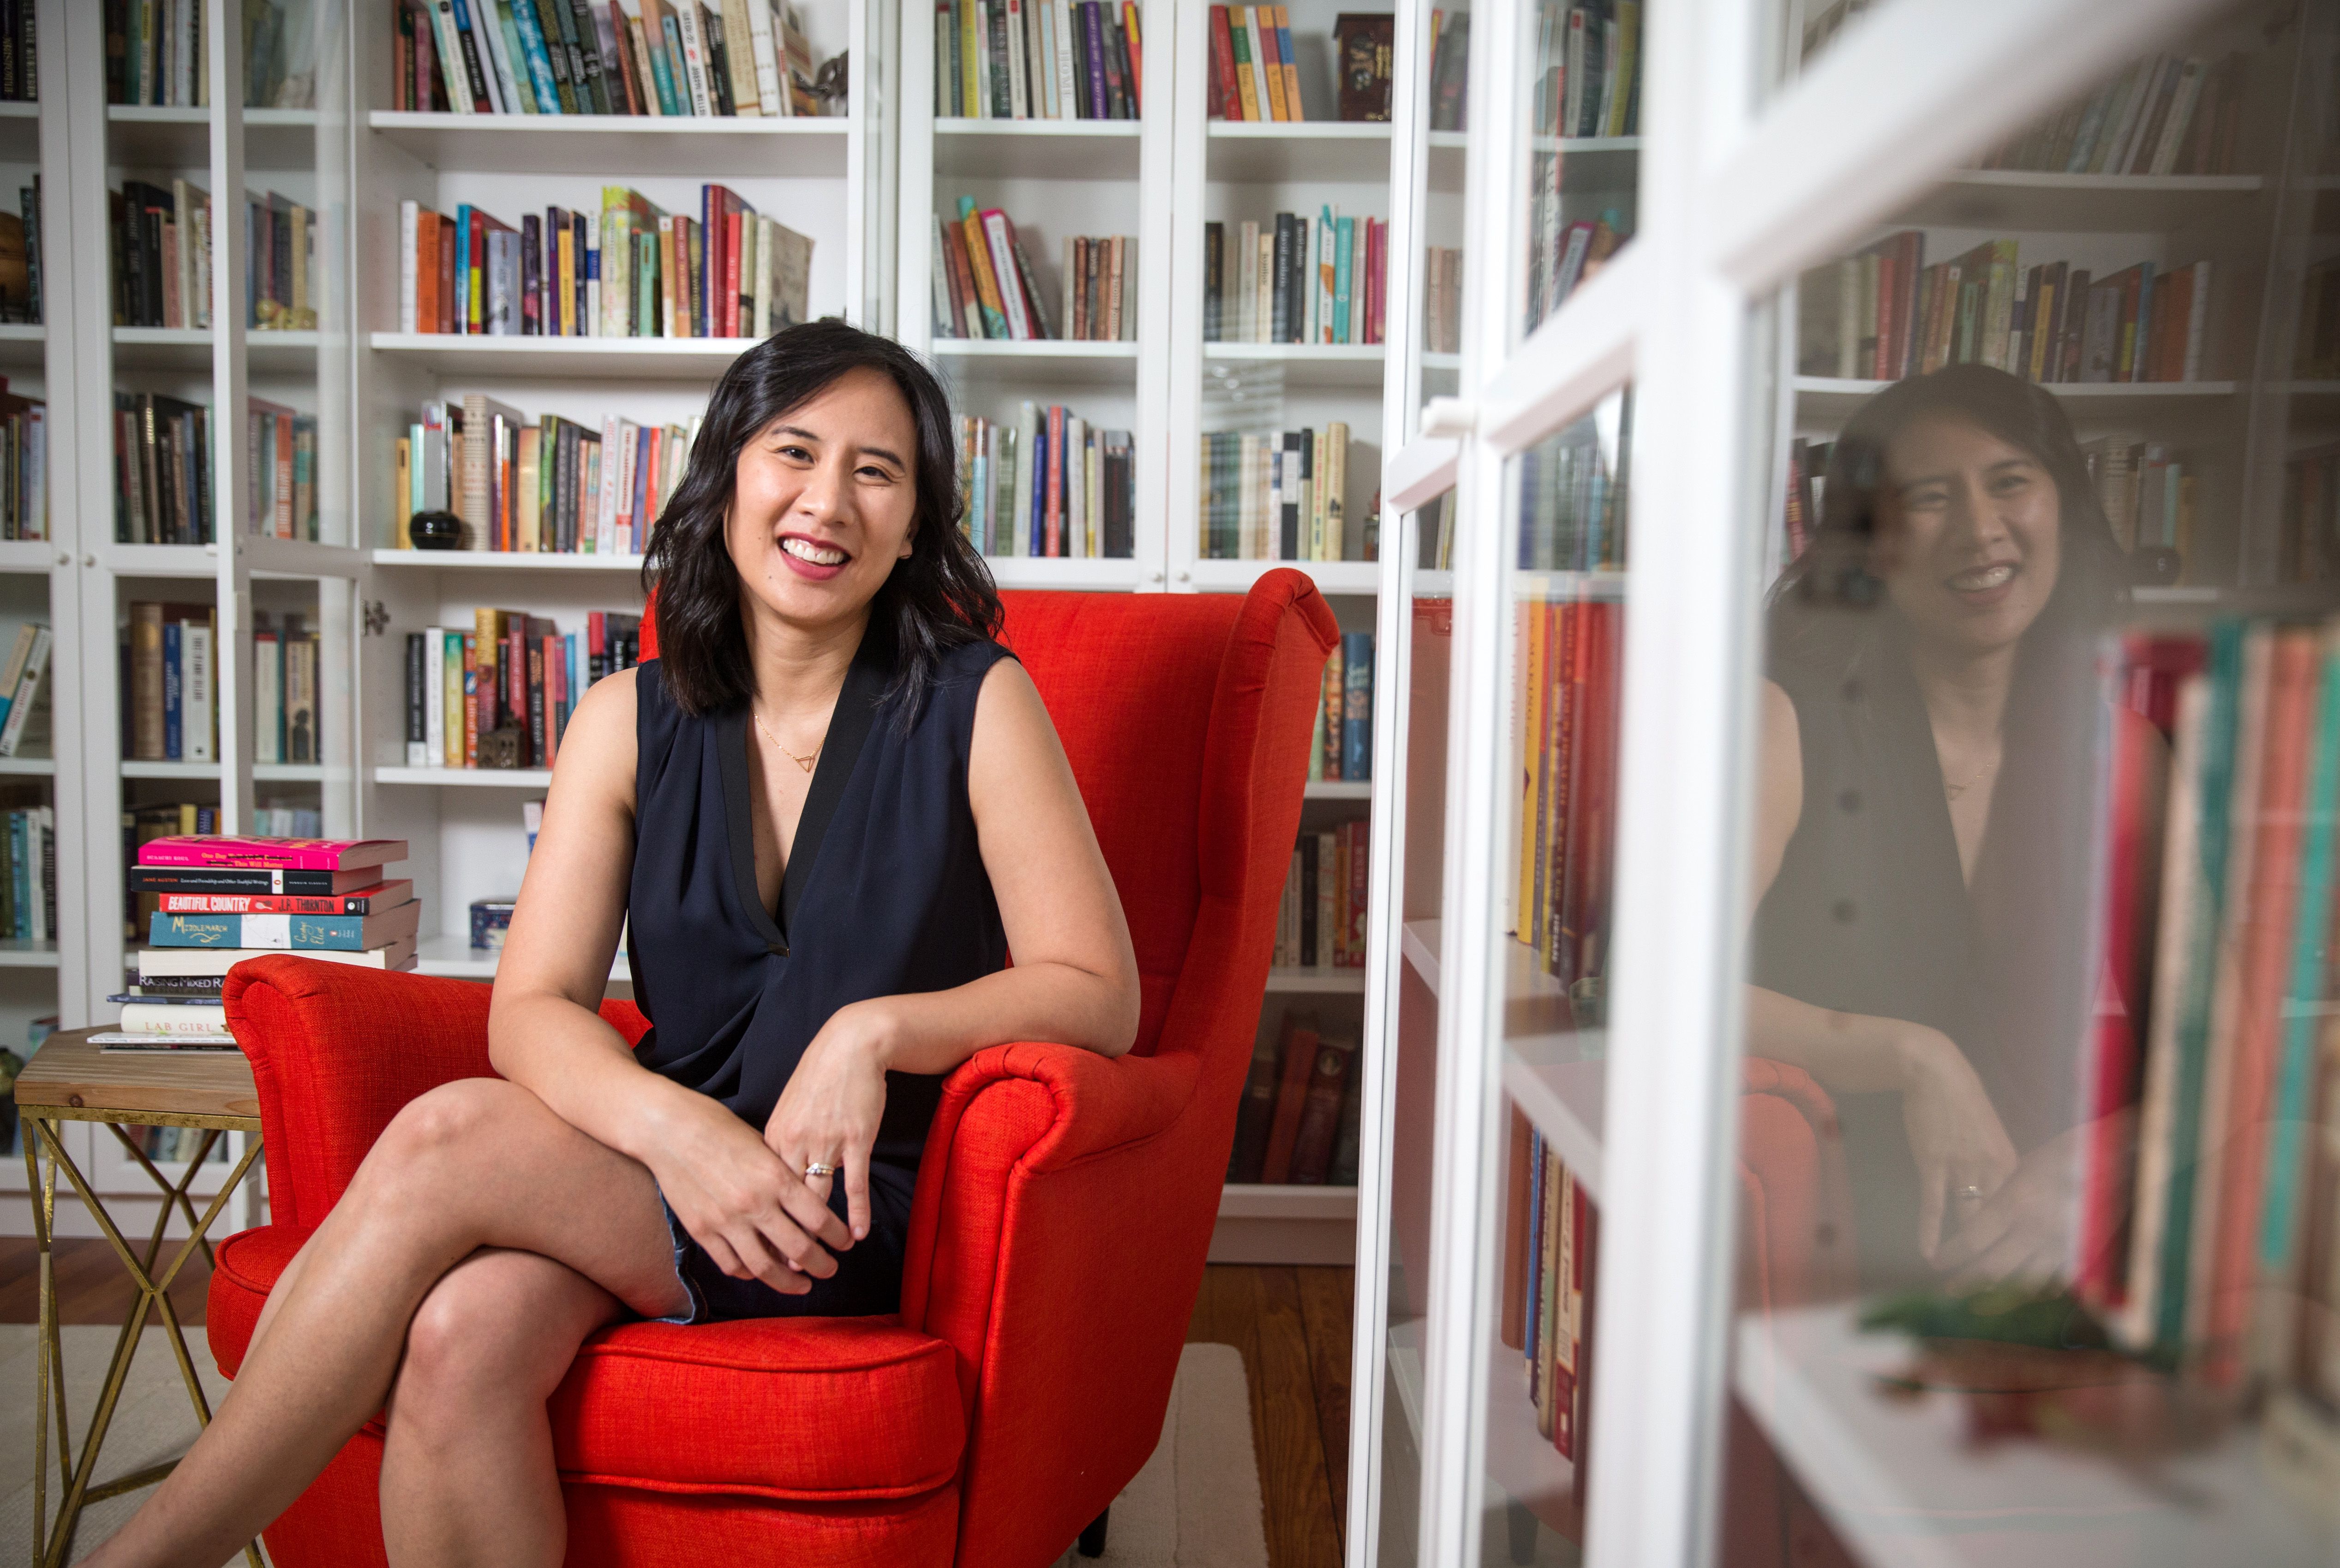 Best Selling Novelist Celeste Ng Tackles Class In America With Her Second Book The Boston Globe